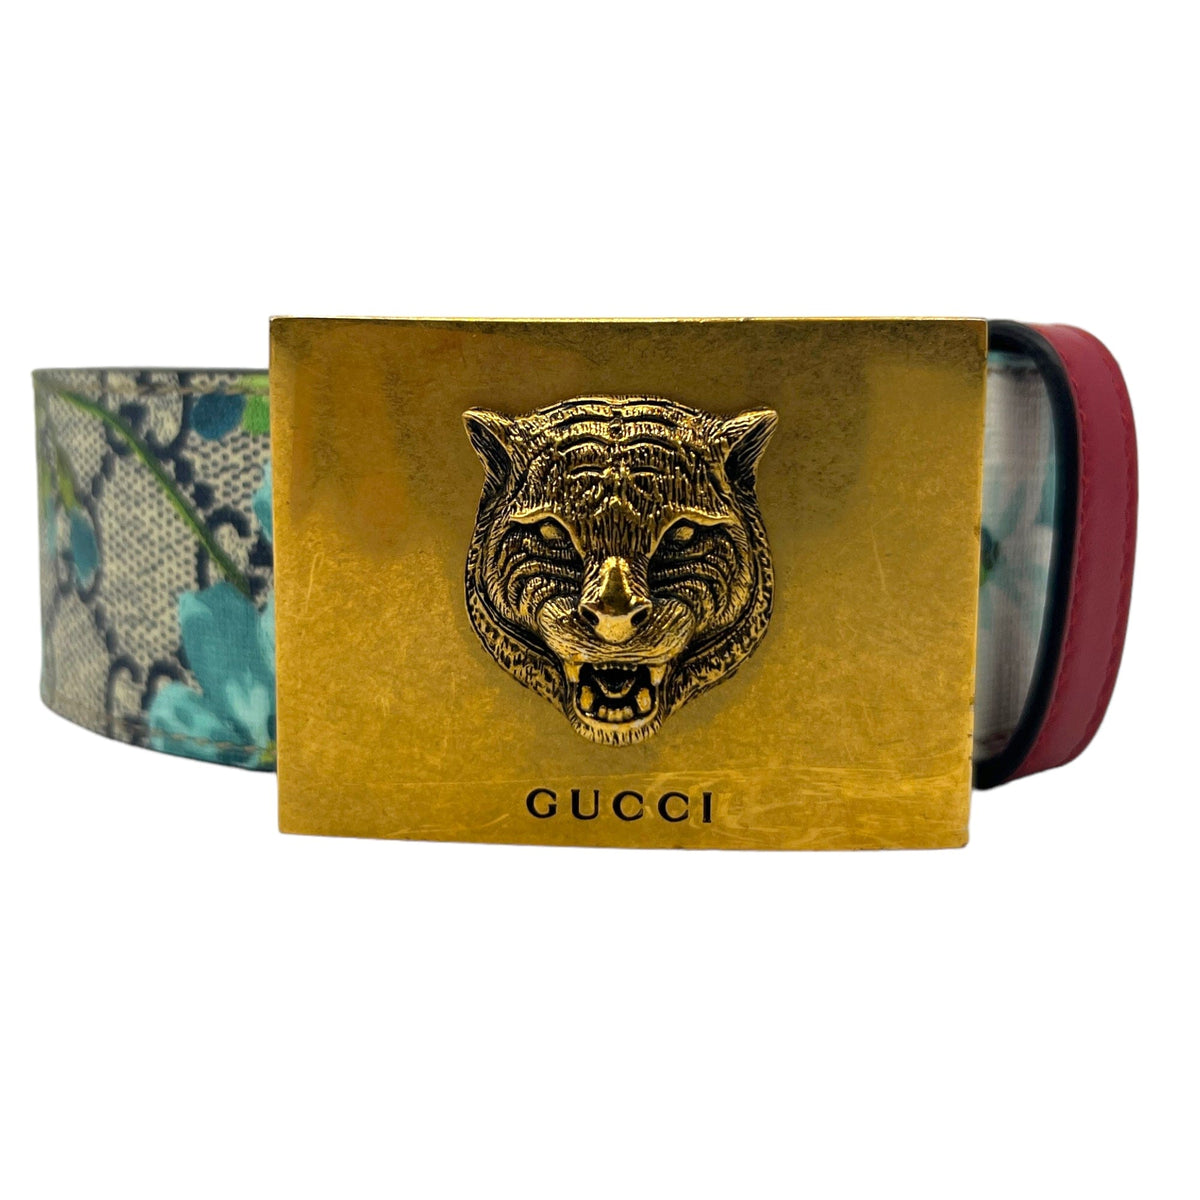 Gucci GG Supreme Blooms Belt with Tiger Head Buckle - Blue